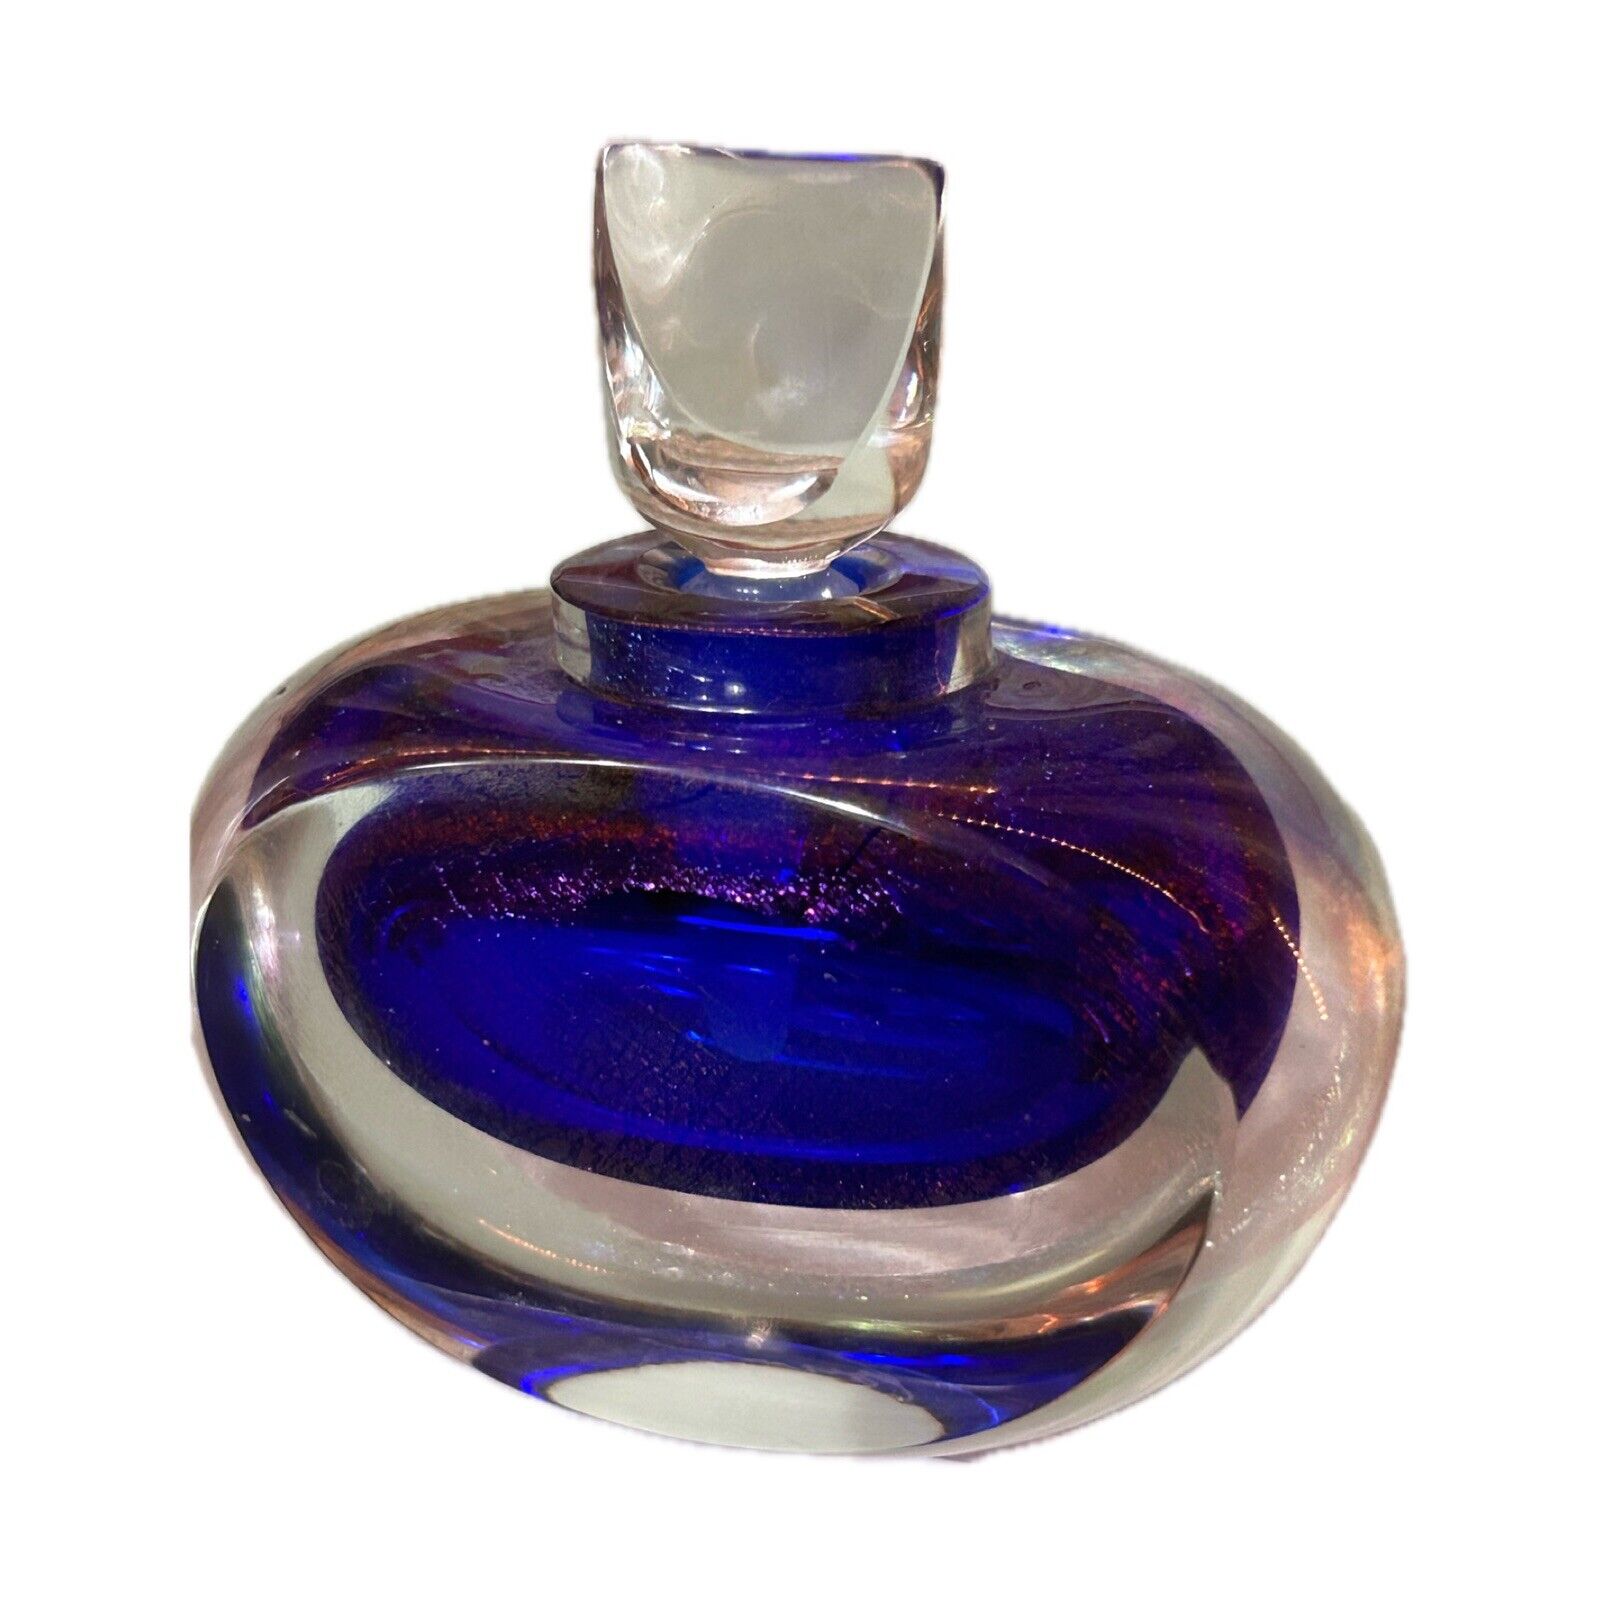 Correia Art Glass Iridescent Cobalt Blue Clear Perfume Bottle Signed Limited Ed